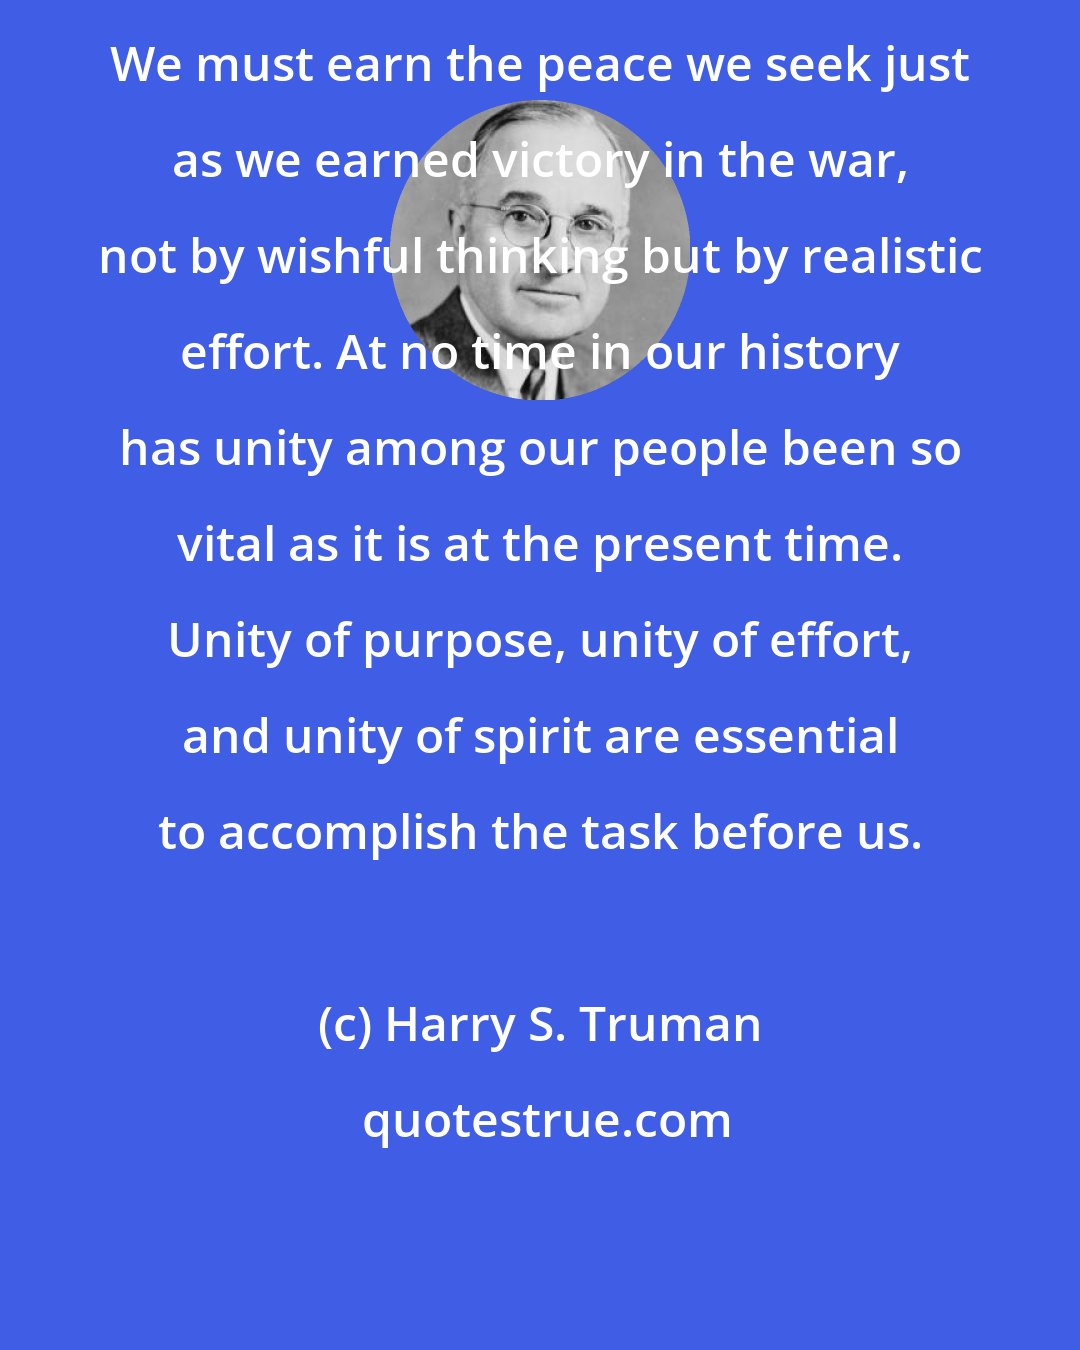 Harry S. Truman: We must earn the peace we seek just as we earned victory in the war, not by wishful thinking but by realistic effort. At no time in our history has unity among our people been so vital as it is at the present time. Unity of purpose, unity of effort, and unity of spirit are essential to accomplish the task before us.